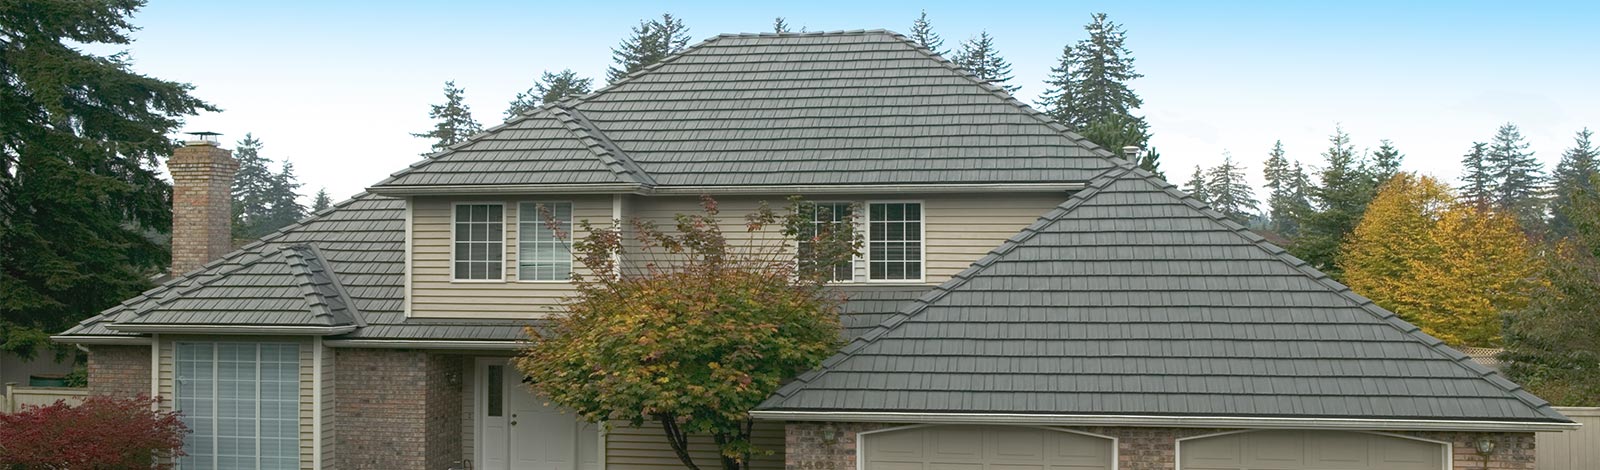 Classic Metal Roofing Canadian Dealers